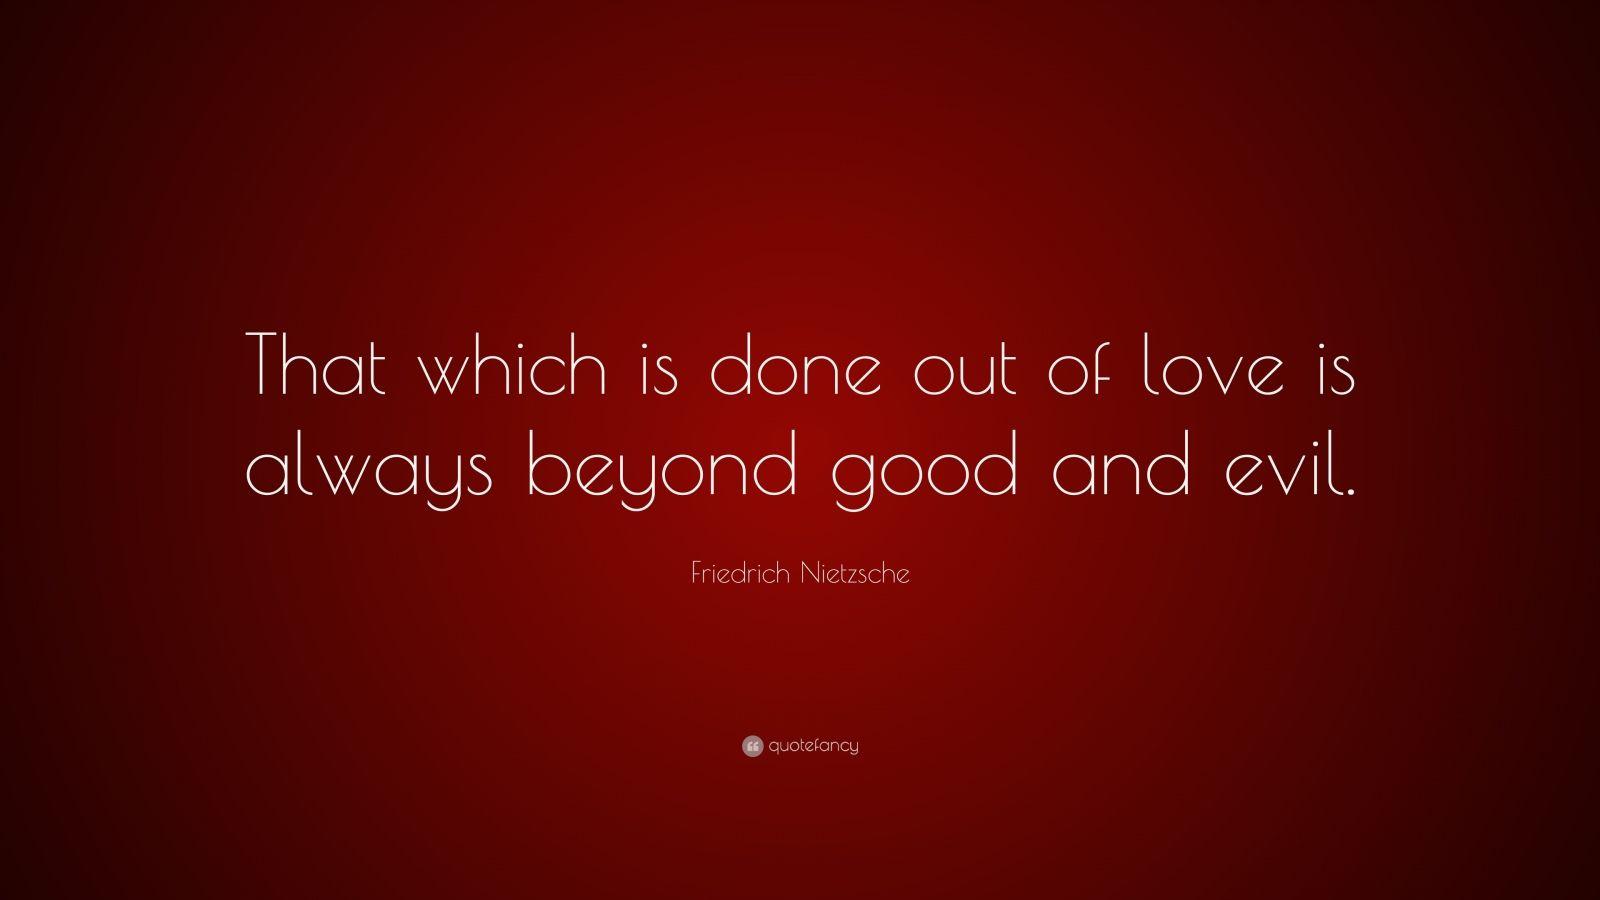 Friedrich Nietzsche Quote: “That which is done out of love